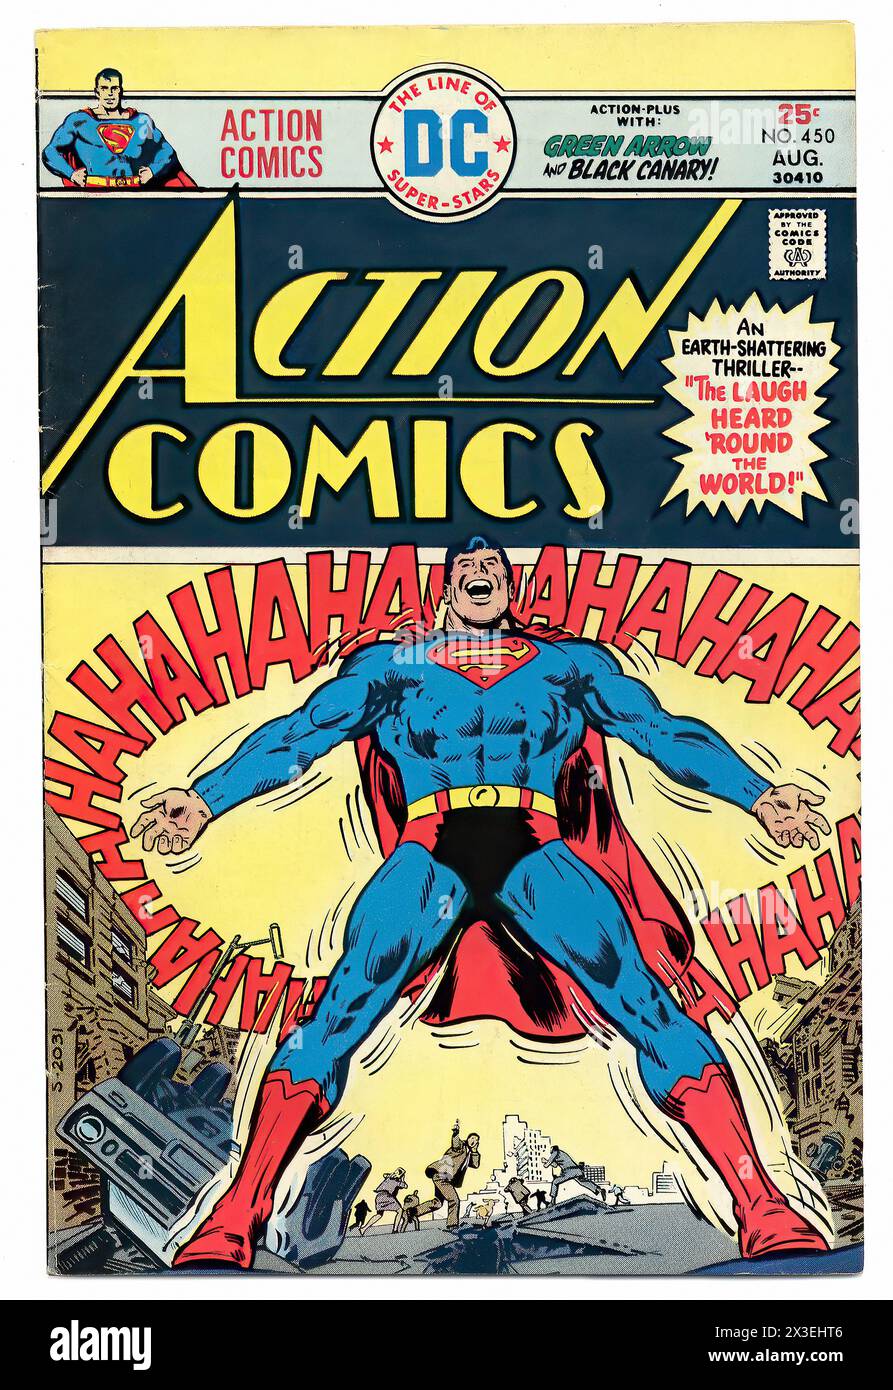 Action Comics, Nr. 450 - Vintage american Illustrated Publication Cover Stockfoto